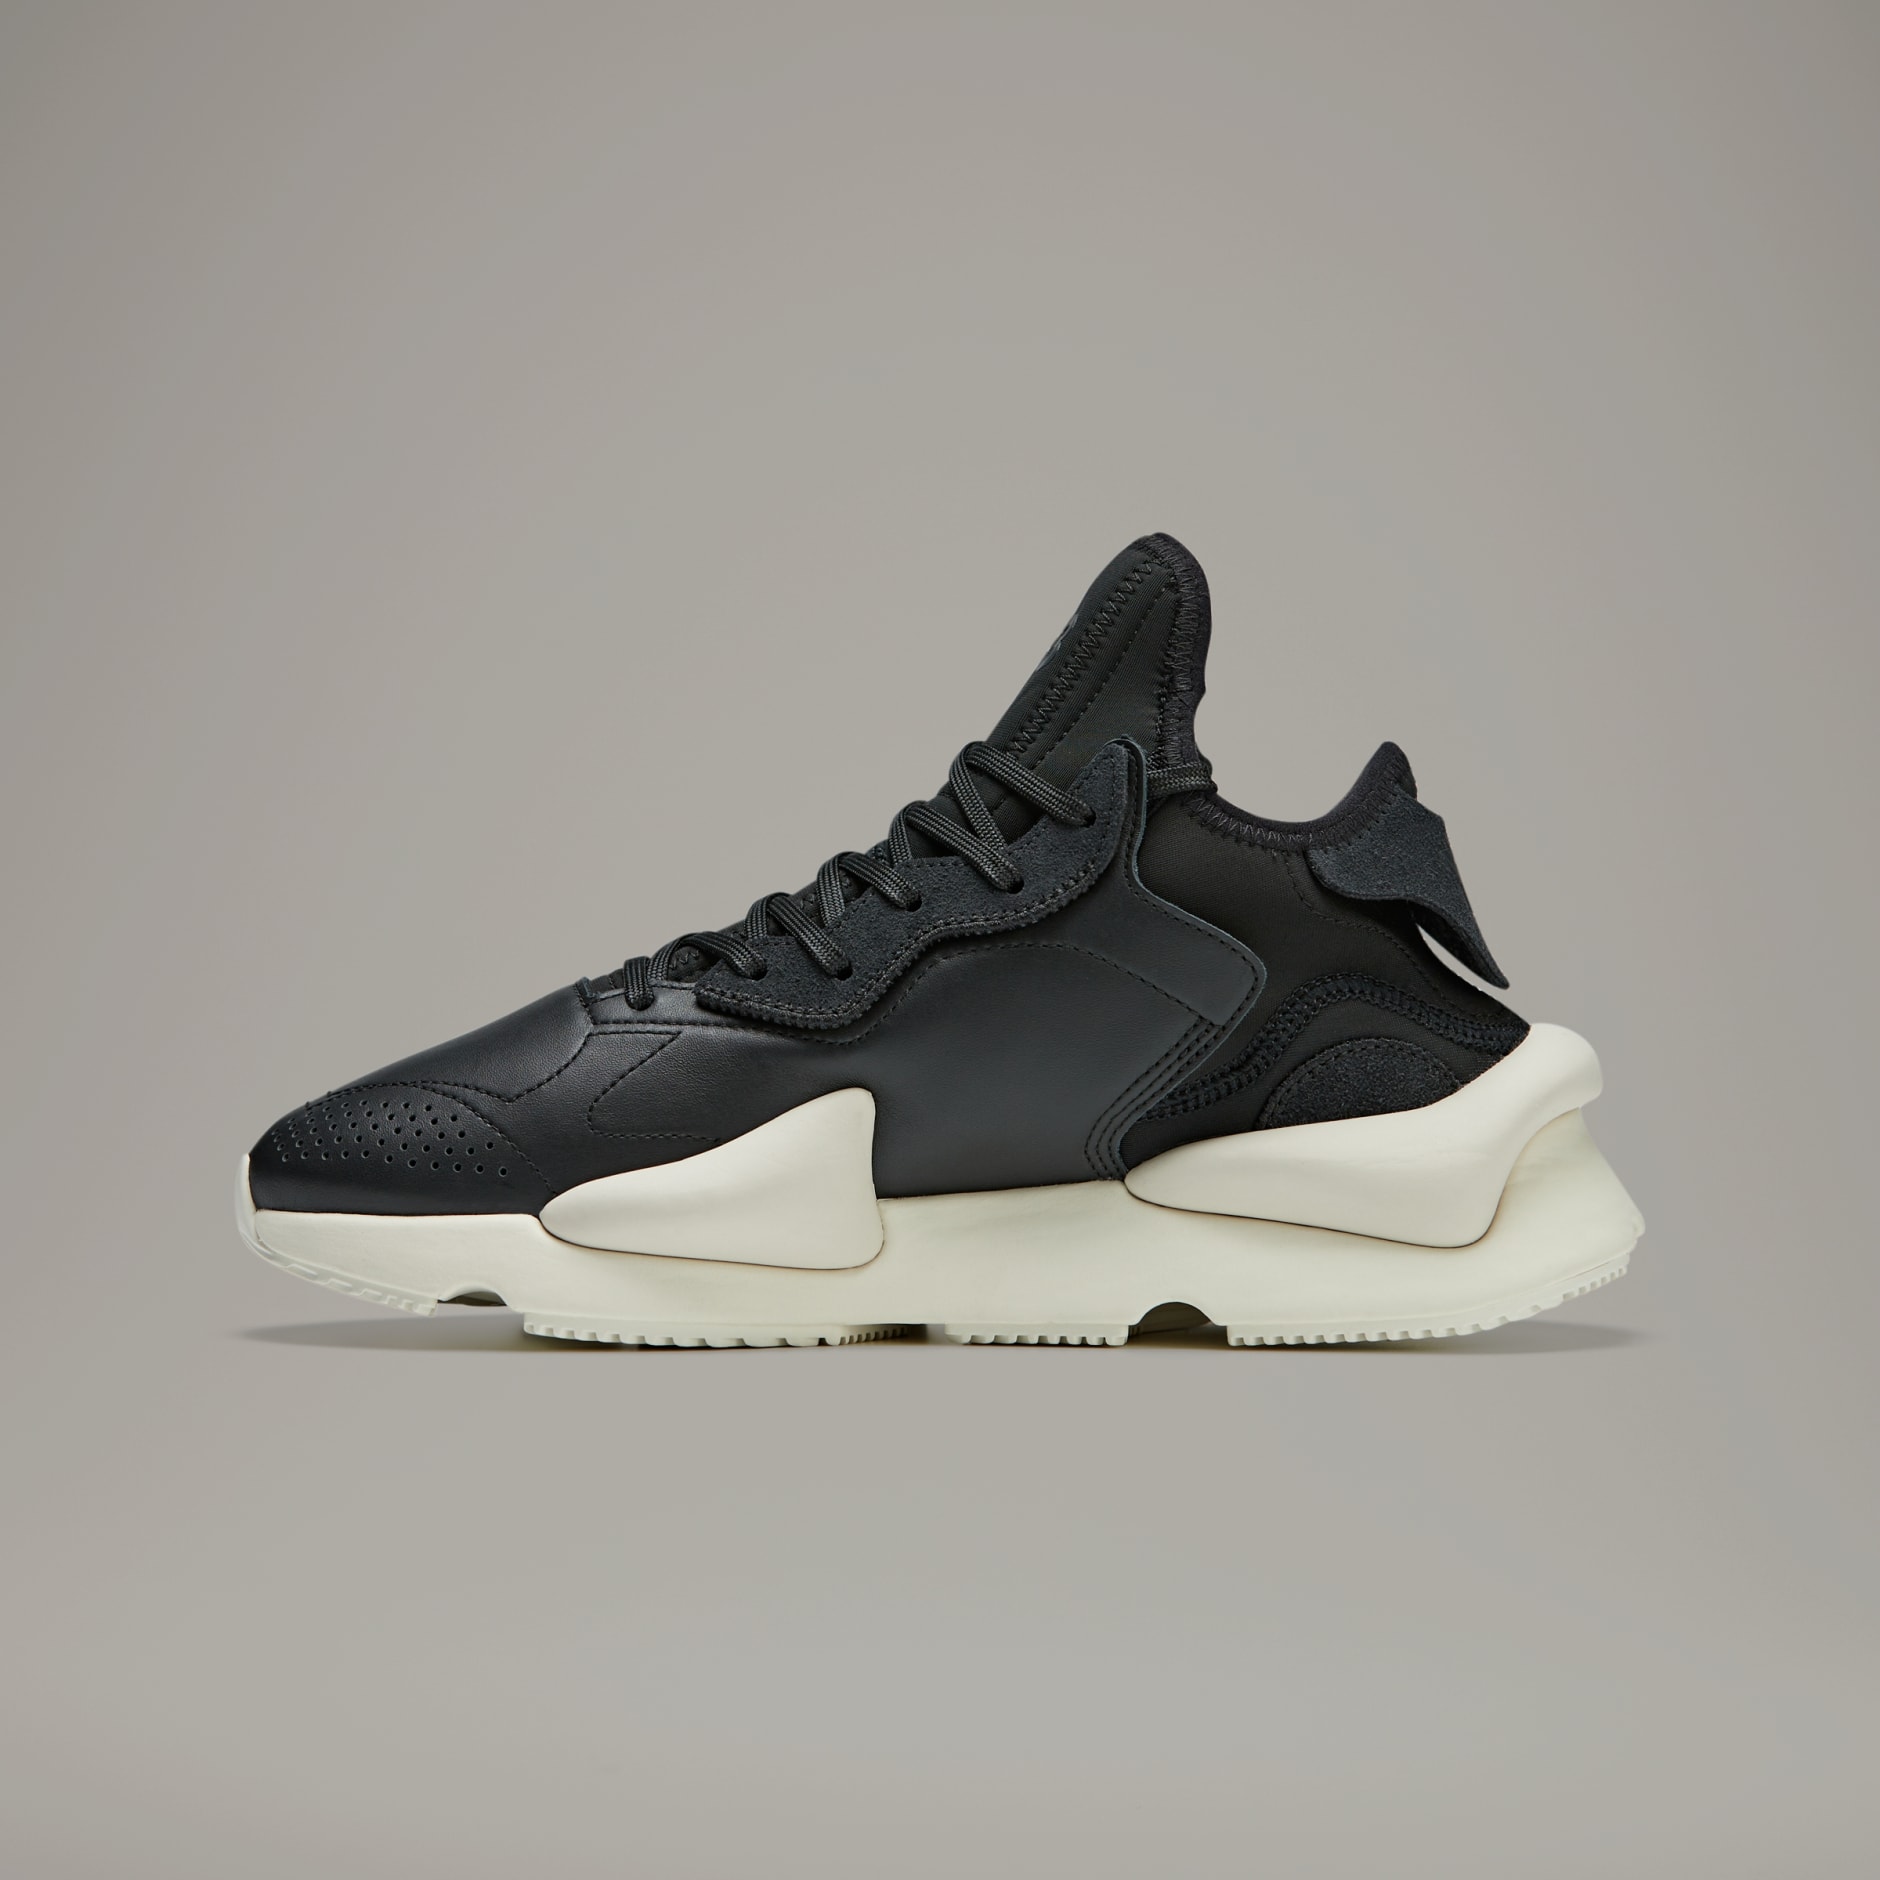 Y-3 Kaiwa Sneakers in Yellow/White Colorway